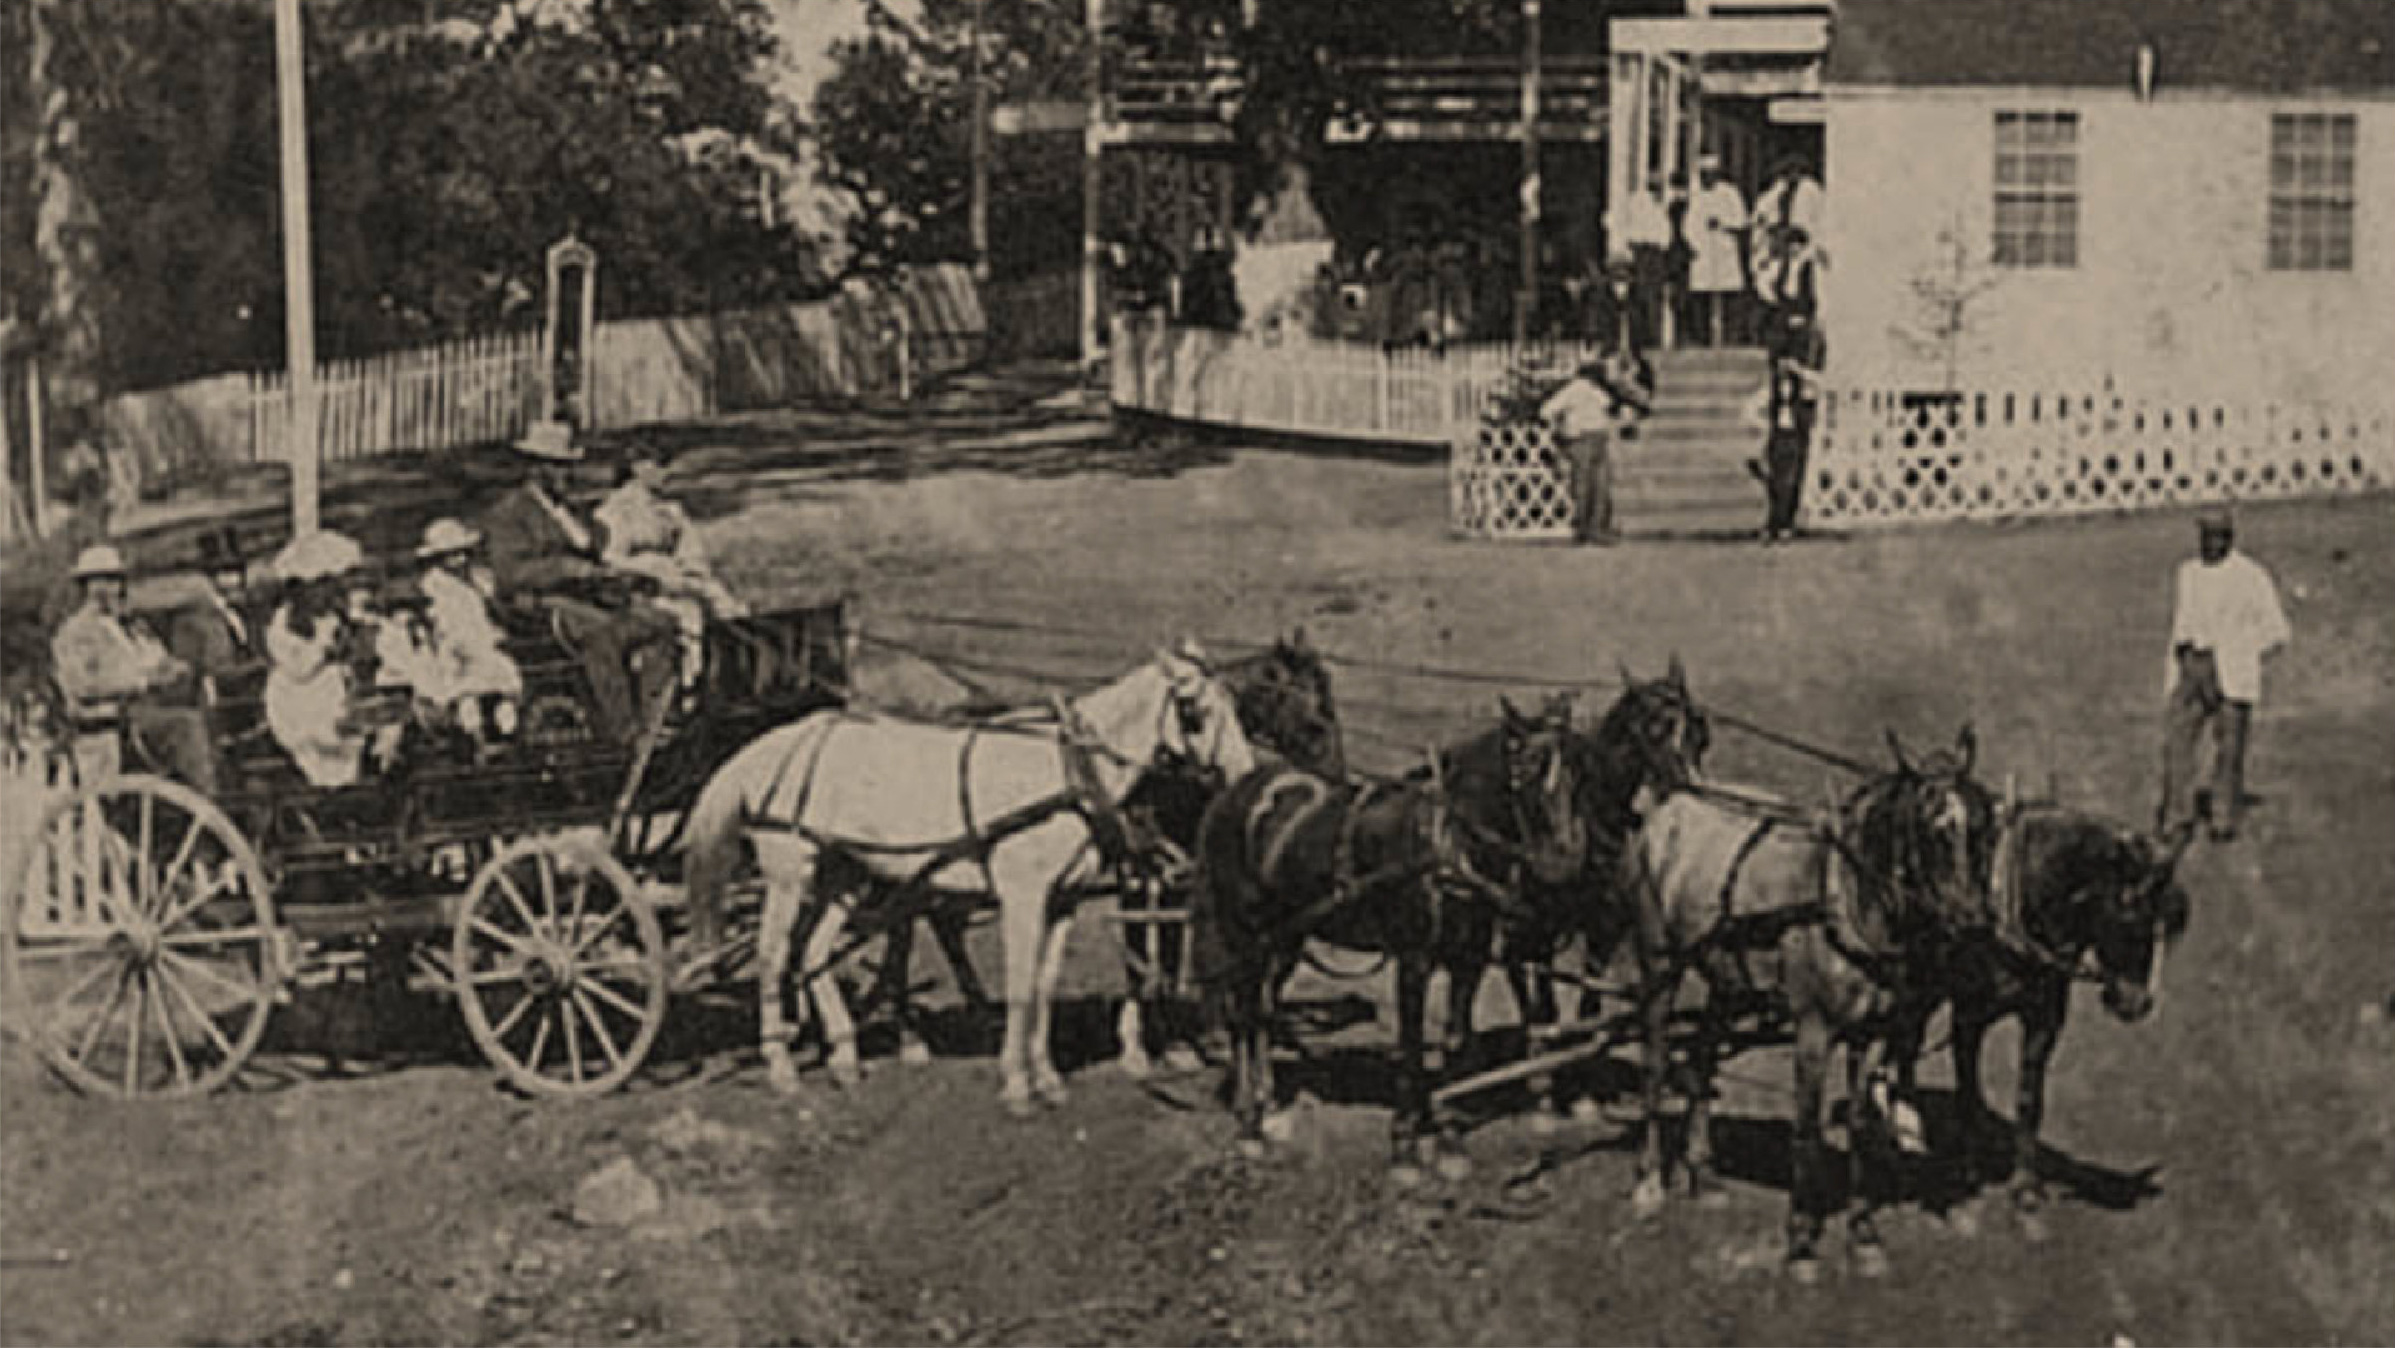 Foss with Passengers in horse-drawn cart